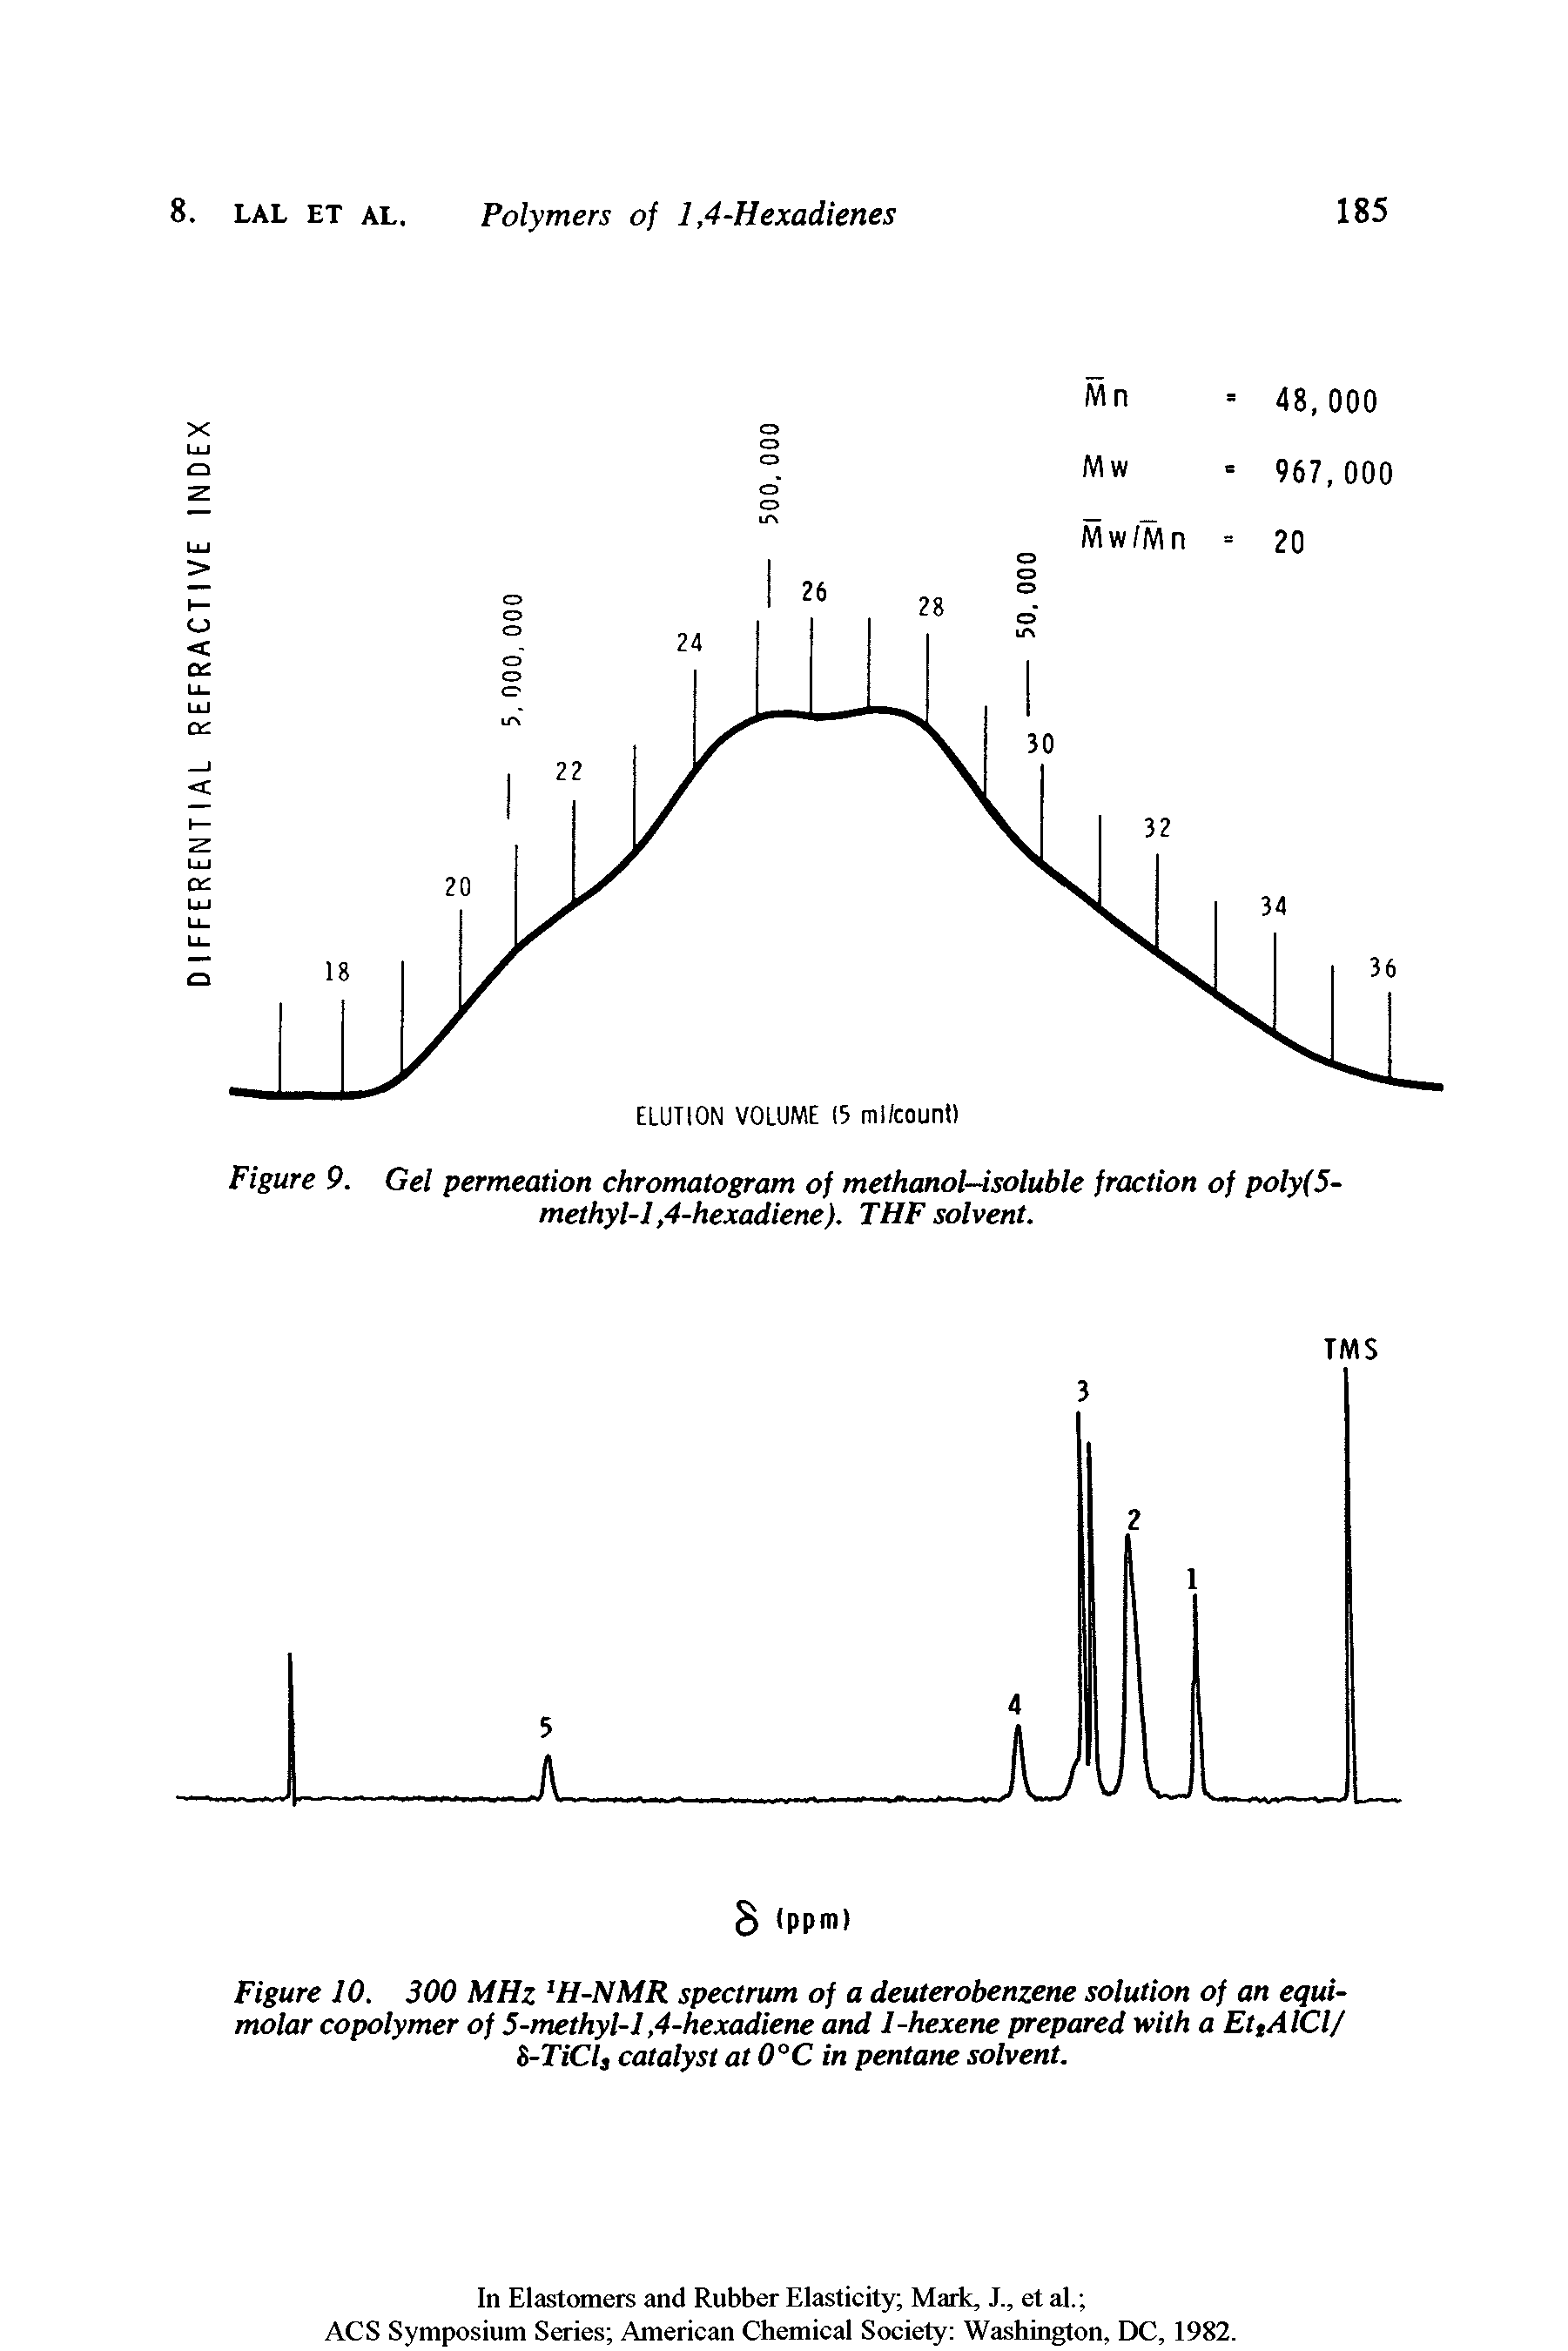 Figure 10. 300 MHz IH-NMR spectrum of a deuterobenzene solution of an equimolar copolymer of 5-methyl-l,4-hexadiene and 1-hexene prepared with a EttAlCl/ S-TiCl, catalyst at 0°C in pentane solvent.